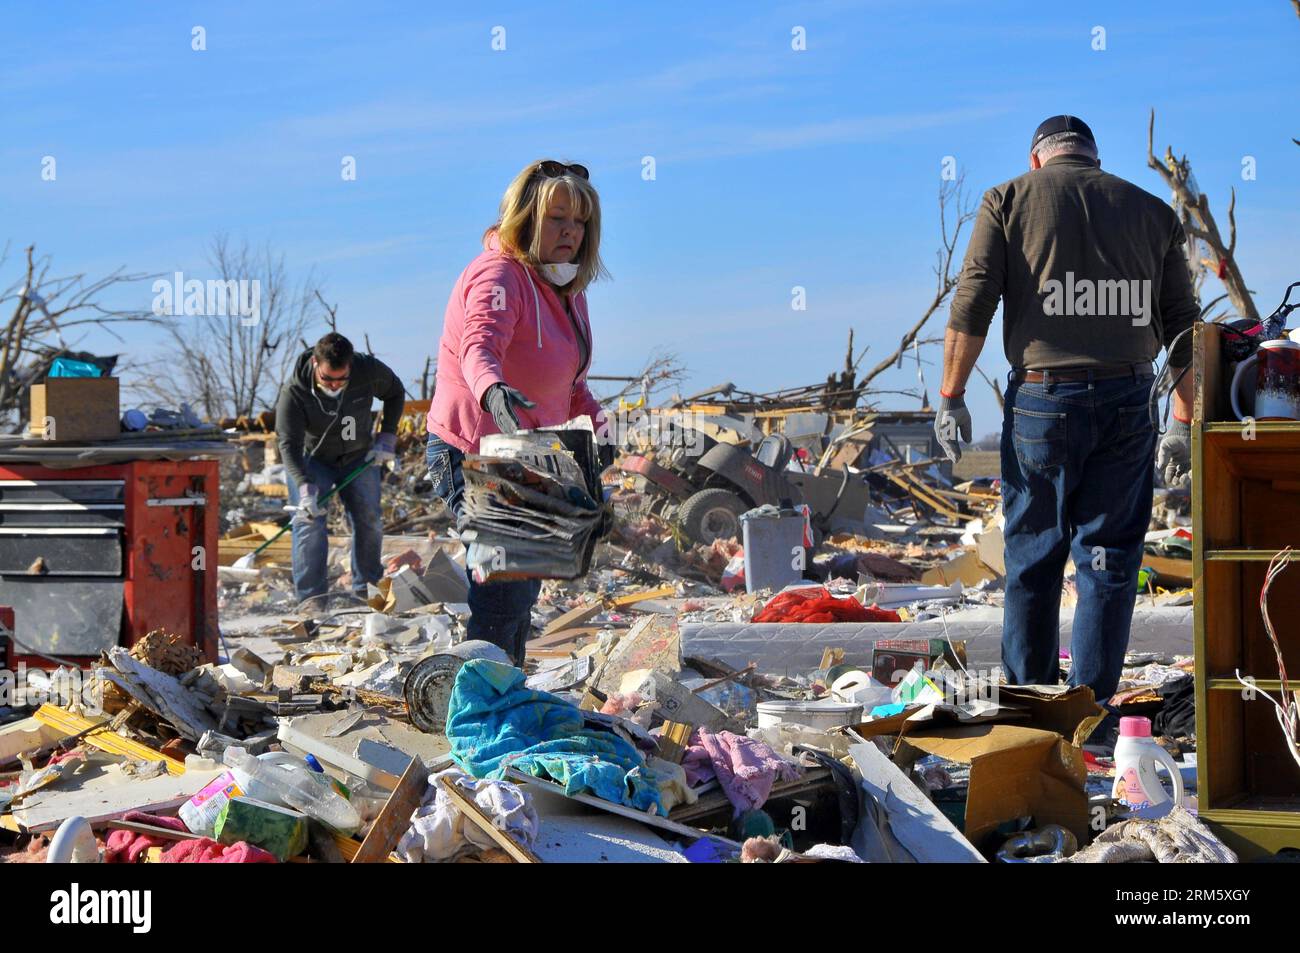 Bildnummer: 60732975  Datum: 19.11.2013  Copyright: imago/Xinhua ILLINOIS, Nov. 19, 2013 (Xinhua) -- Local residents work in ruins after a tornado attack in the town of Washington in Illinois, the United States, on Nov. 19, 2013. At least 16 were killed during tornado attacks on Sunday, according to the National Weather Service. (Xinhua/Zhang Baoping)(ybg) US-ILLINOIS-TORNADO PUBLICATIONxNOTxINxCHN Gesellschaft USA Naturkatastrophe x0x xsk 2013 quer     60732975 Date 19 11 2013 Copyright Imago XINHUA Illinois Nov 19 2013 XINHUA Local Residents Work in Ruins After a Tornado Attack in The Town o Stock Photo